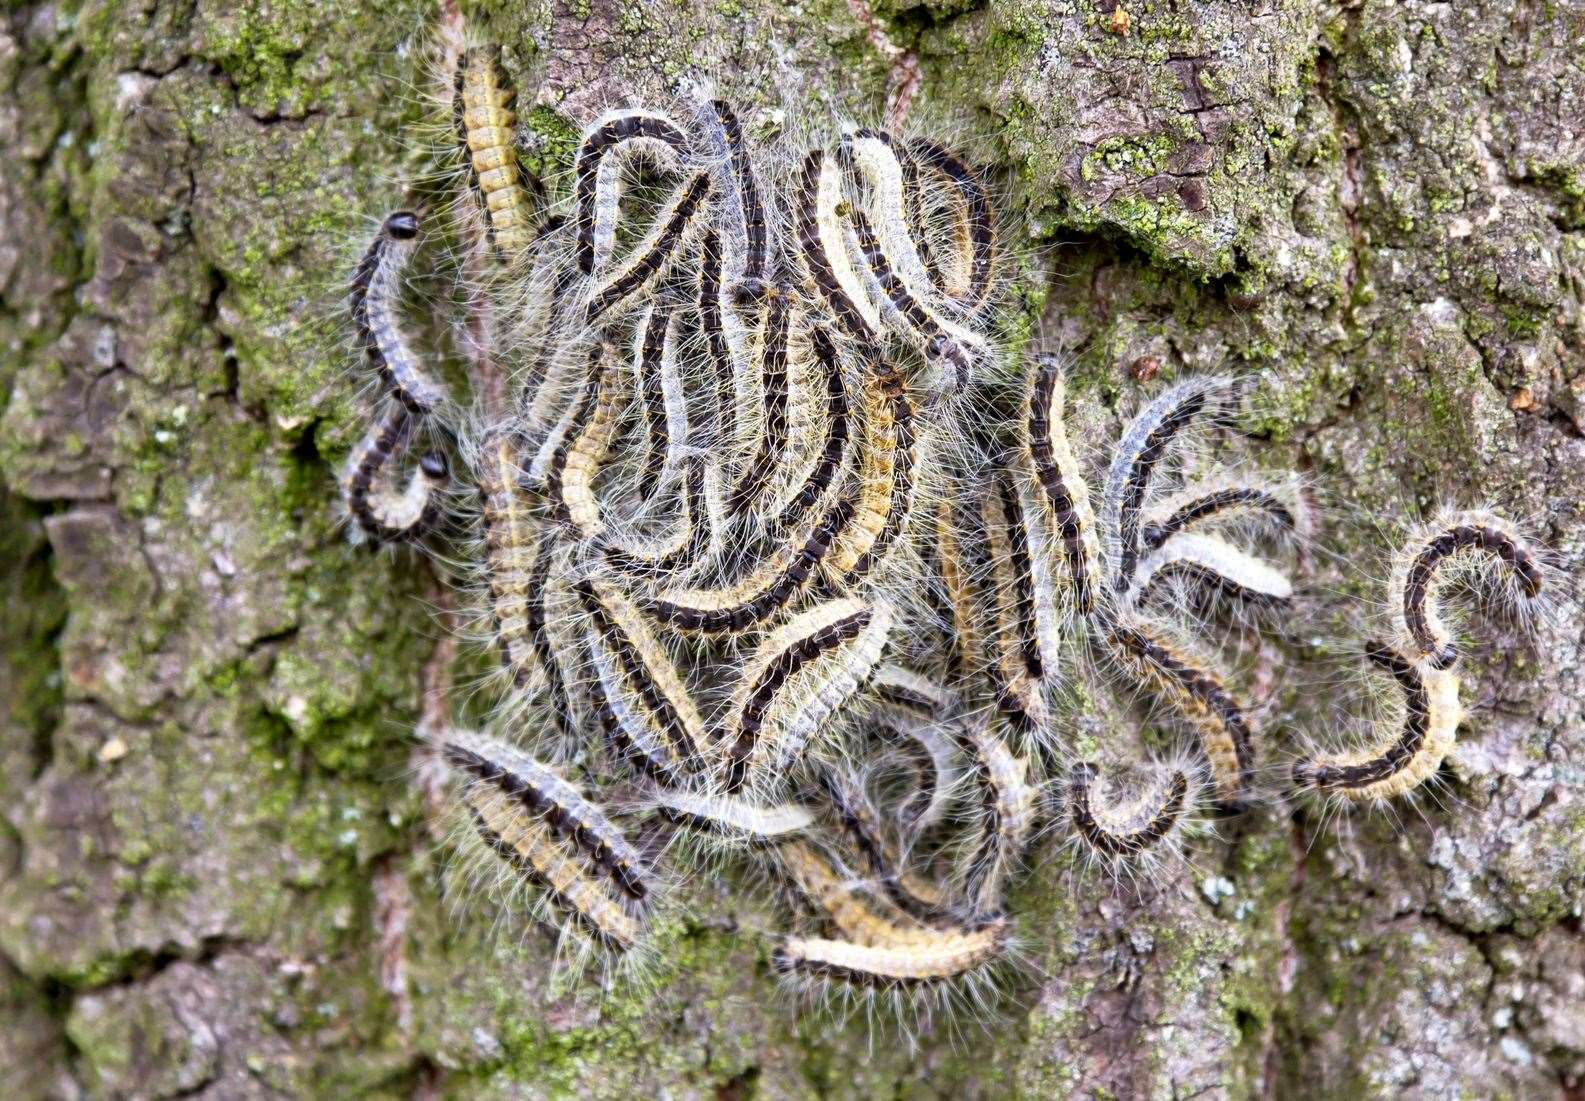 The caterpillars emerge and move down trees ahead of transforming into moths. Image: Stock photo.